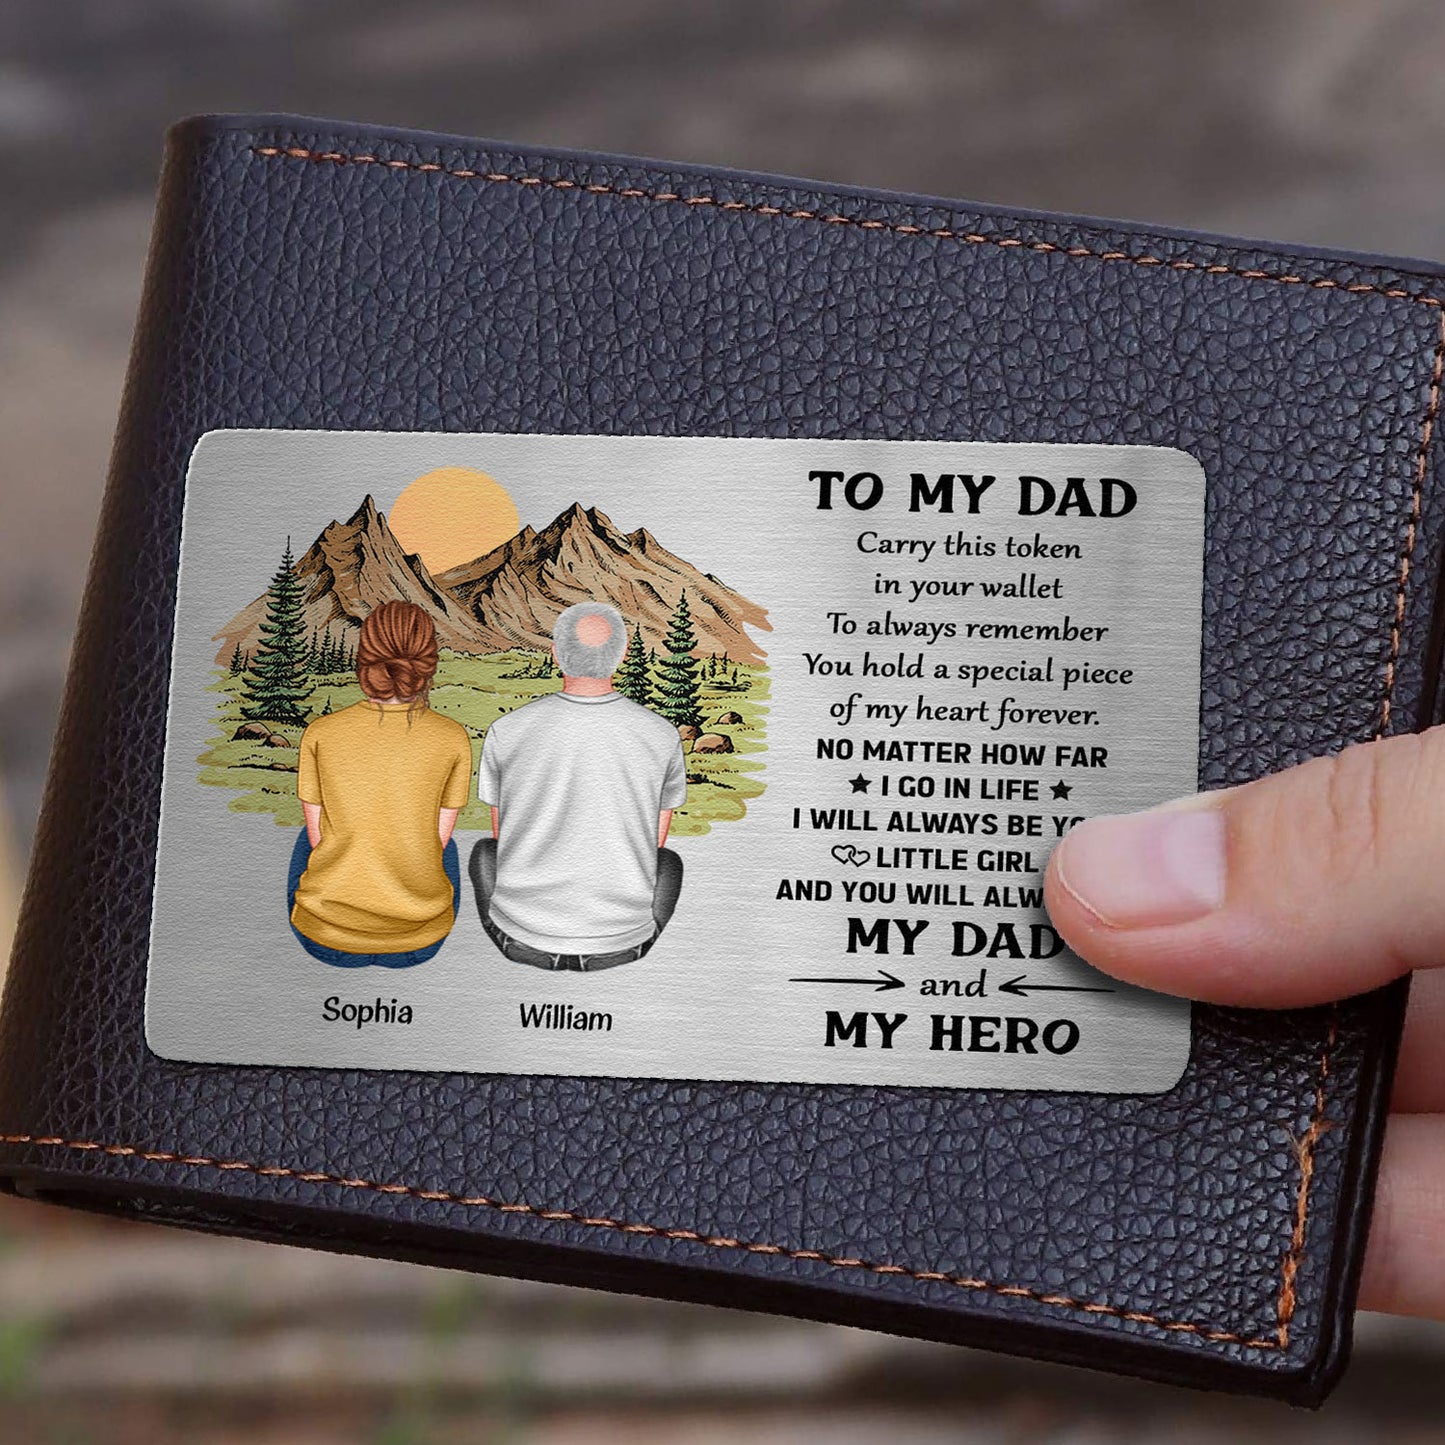 Carry This Token In Your Wallet - Personalized Aluminum Wallet Card